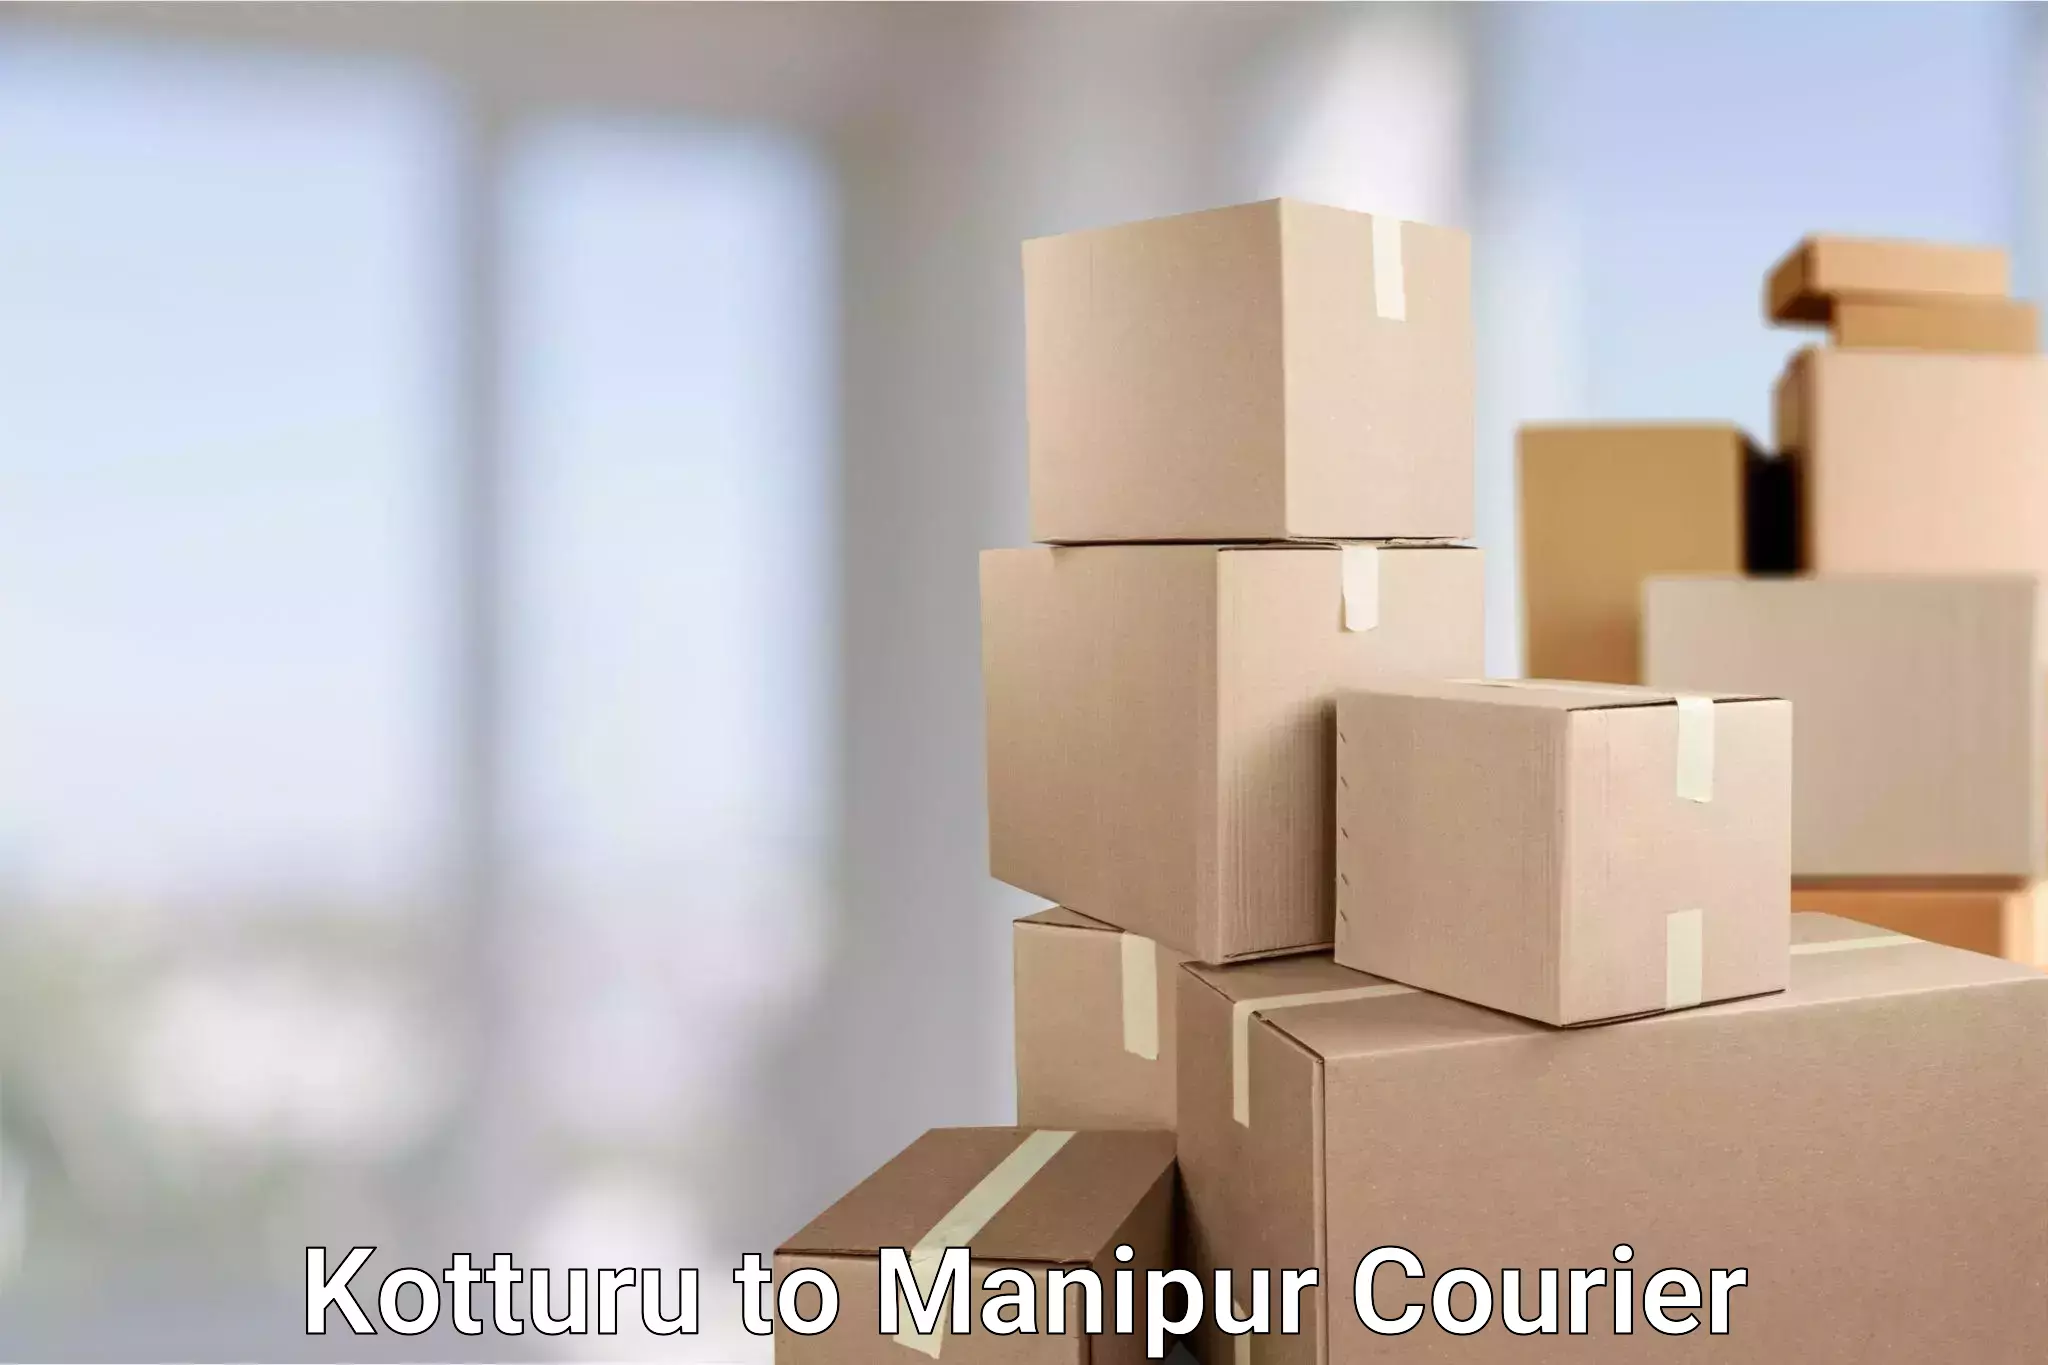 Reliable delivery network in Kotturu to Moirang